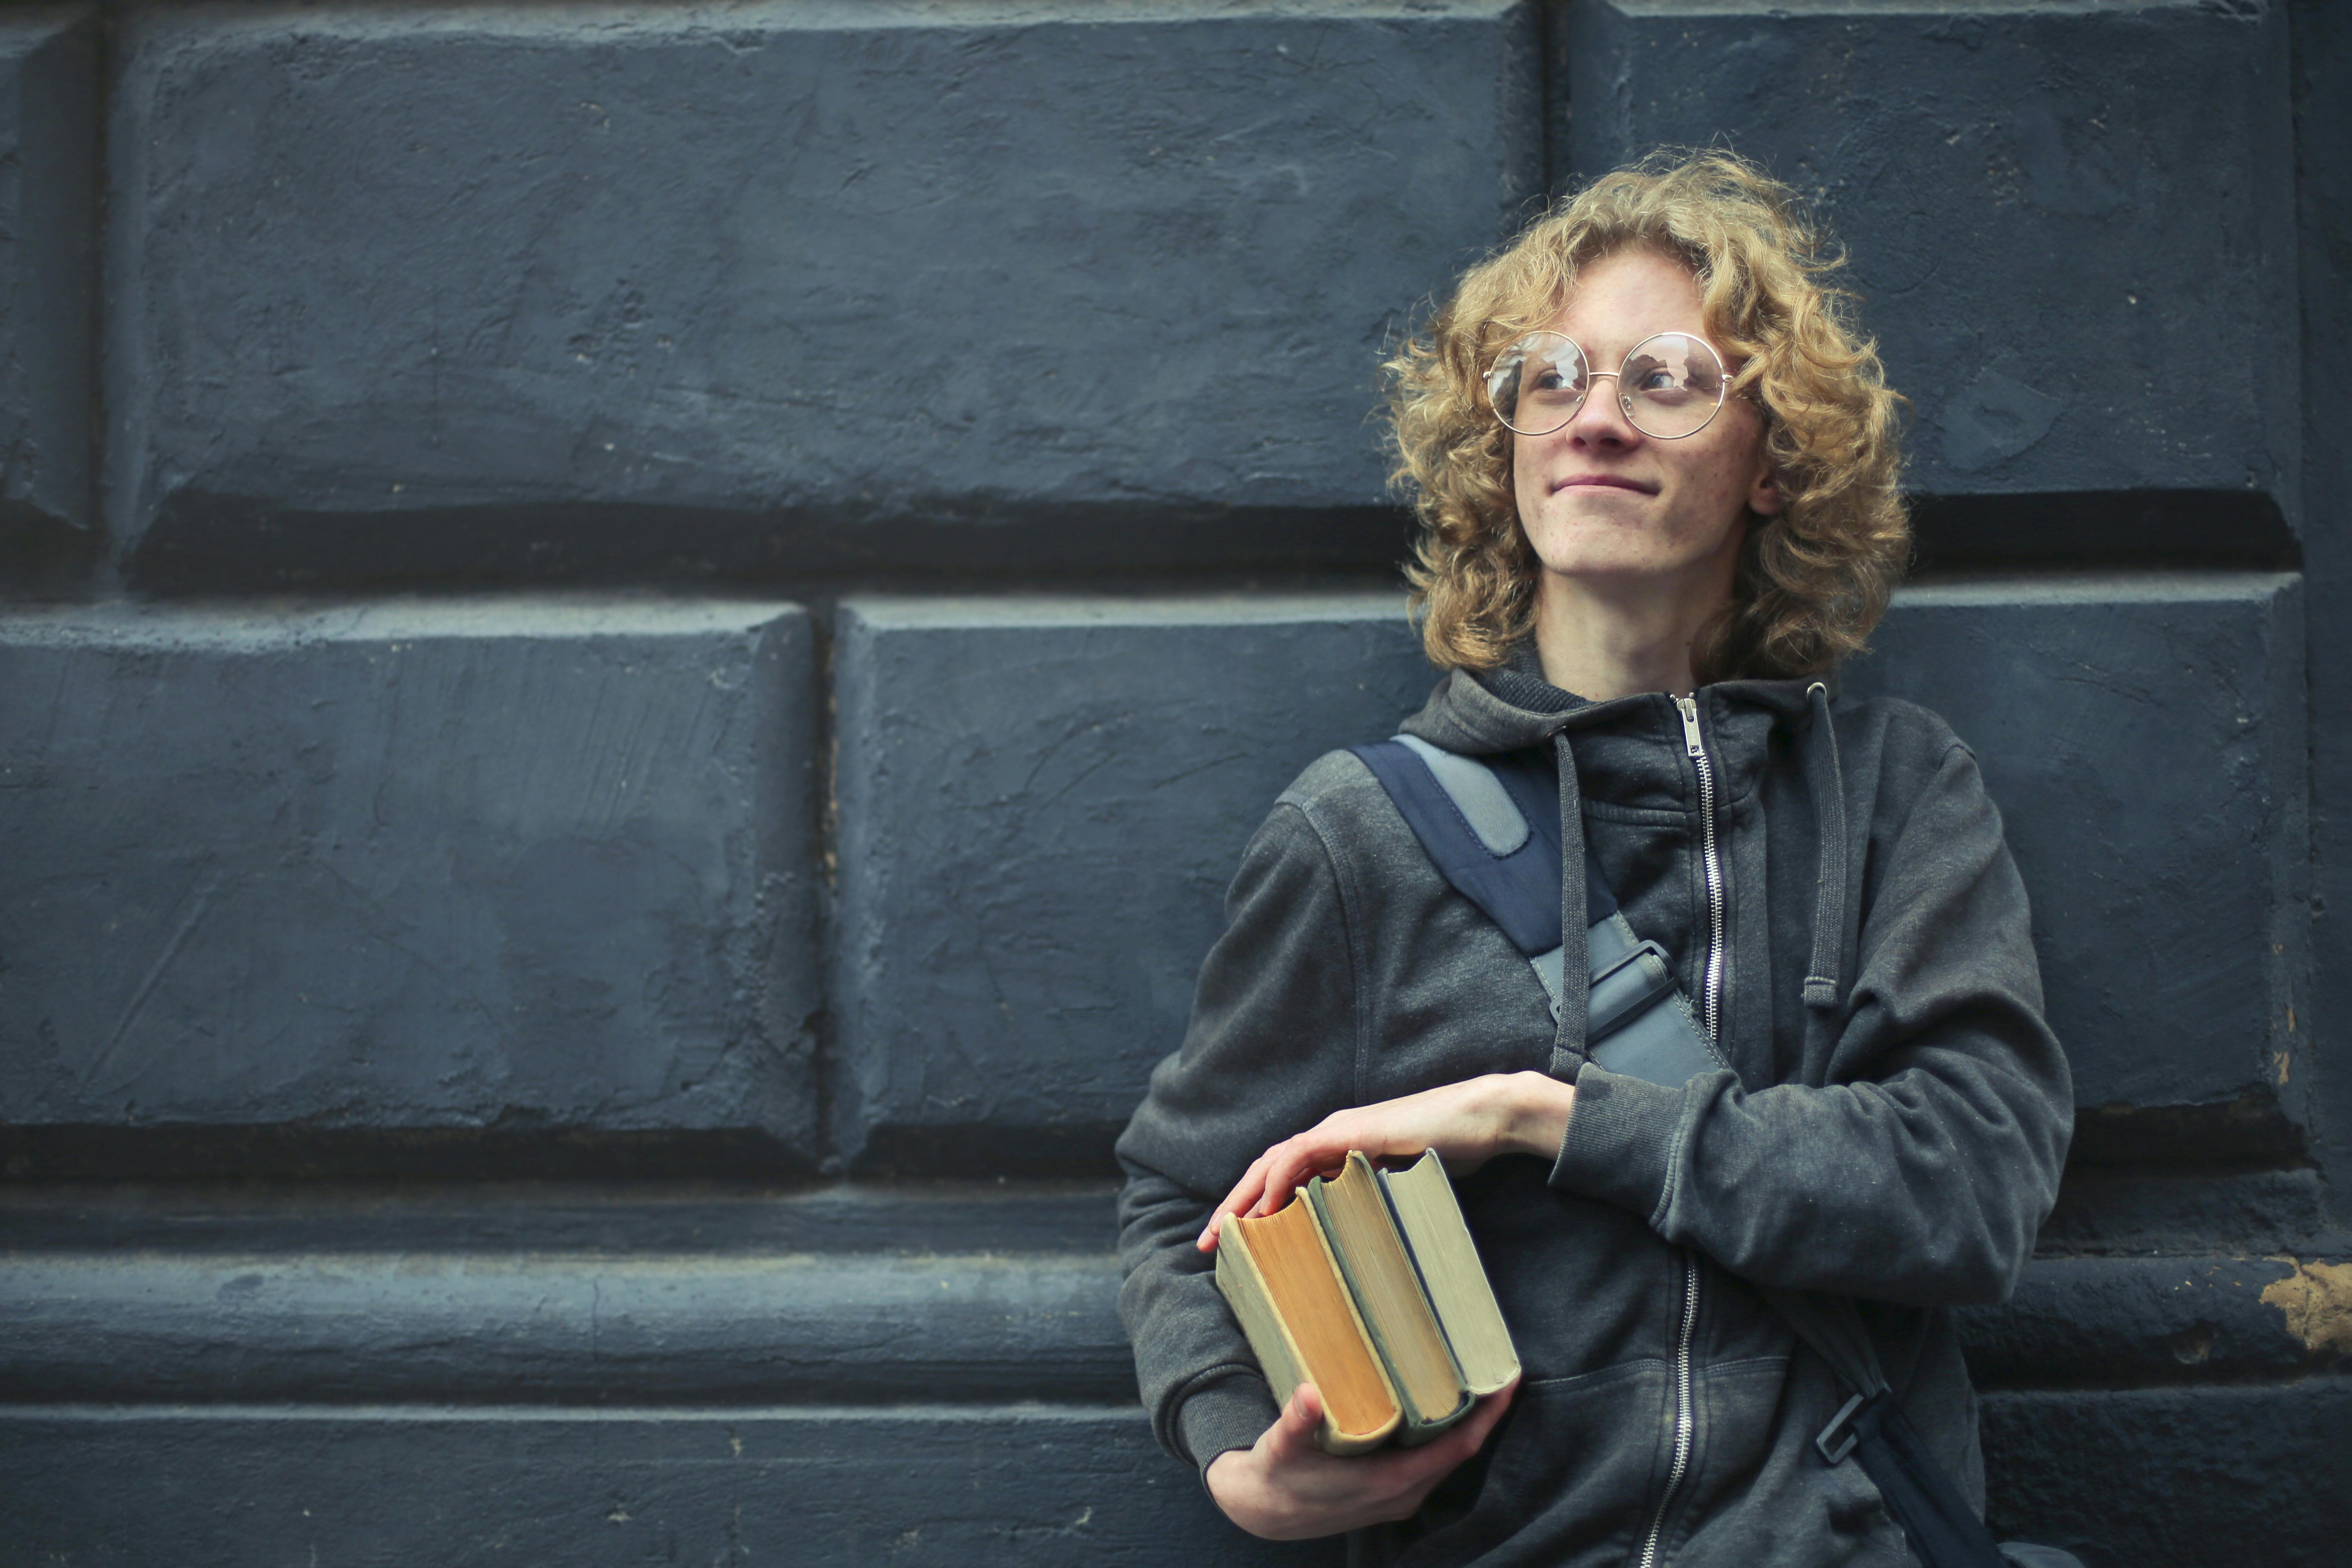 young man leaning against the wall holding a books